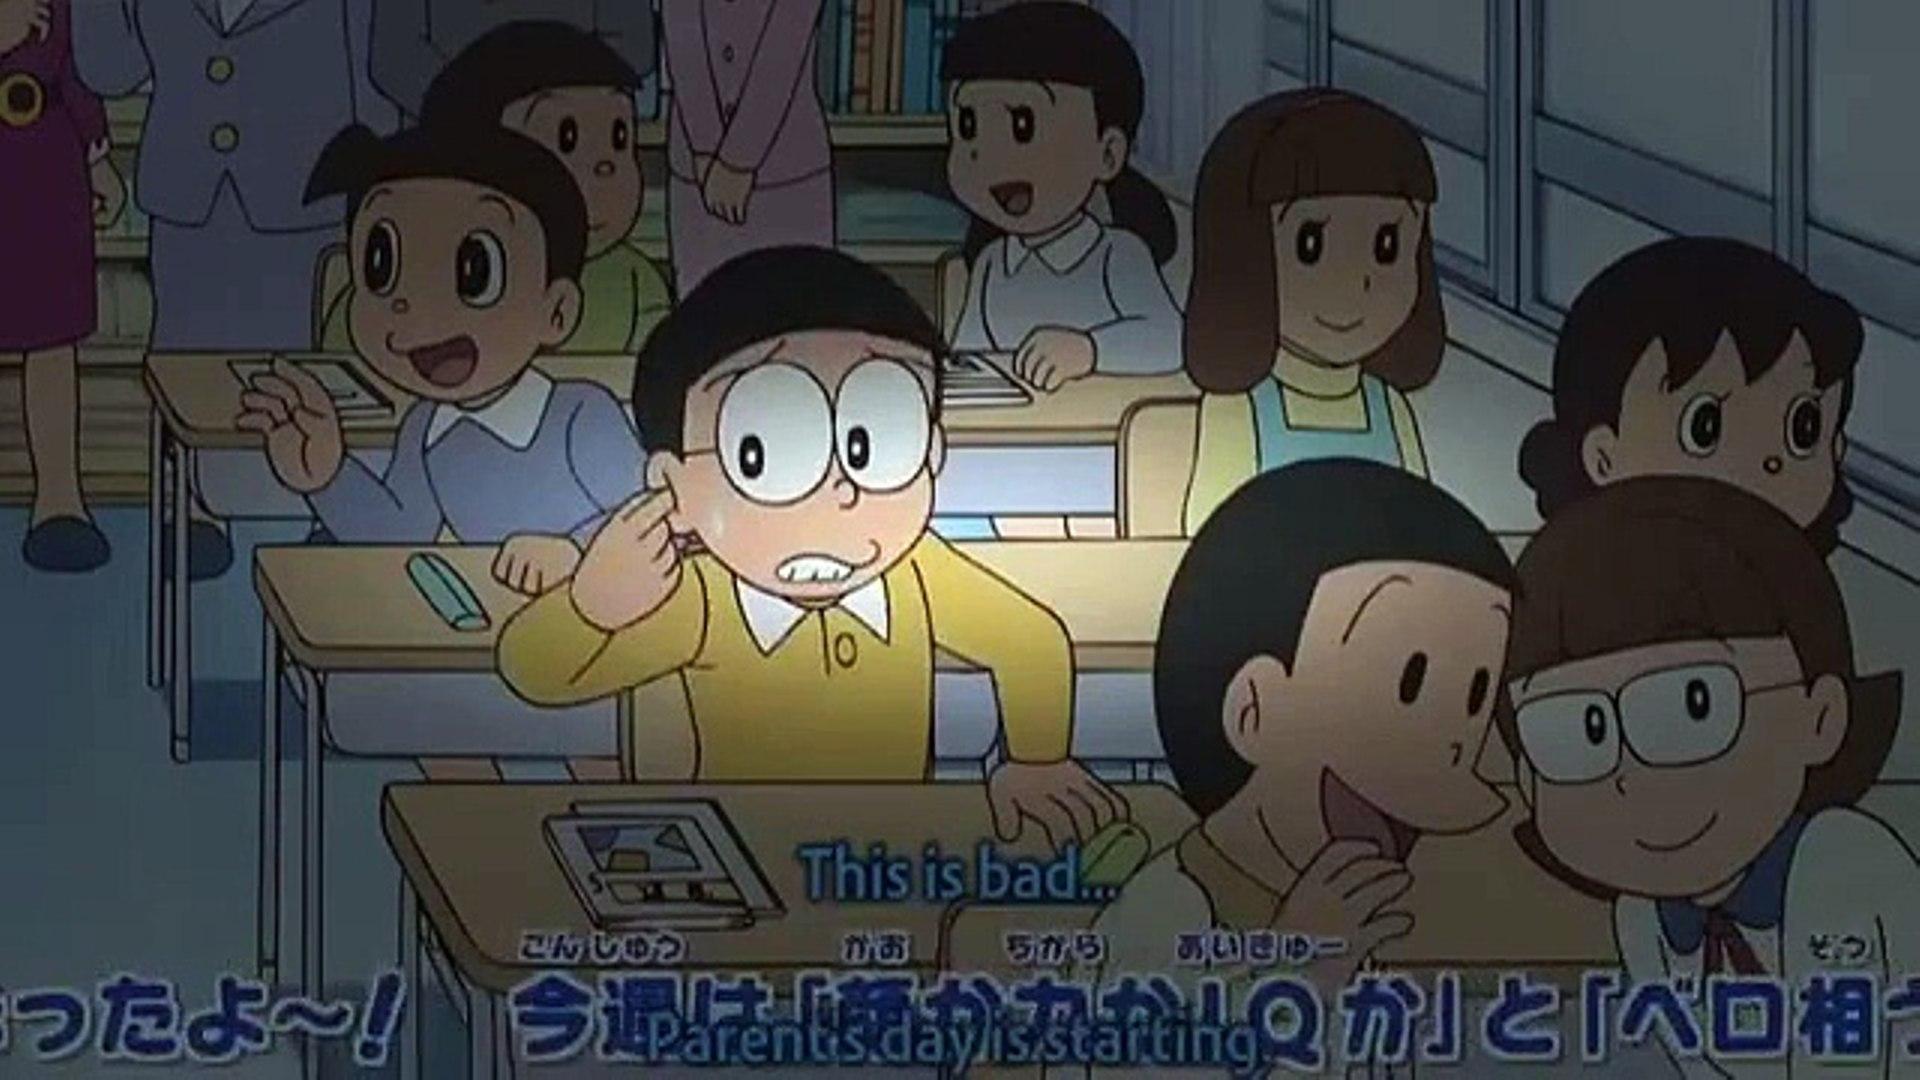 Doraemon Engsub) Let's Live to Laugh & Nobita's Son Ran Away from